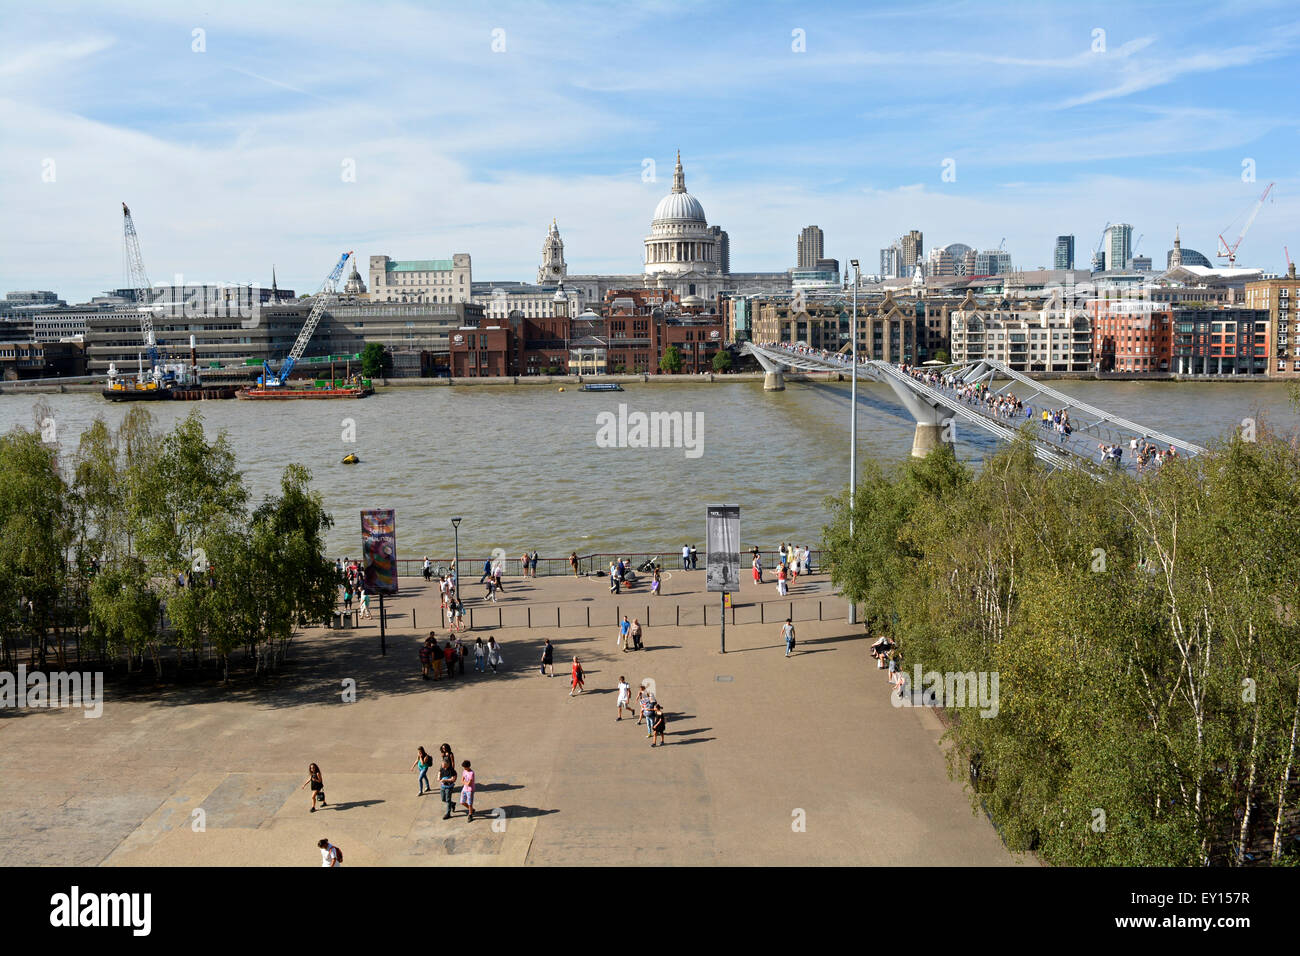 View of St Paul's Cathedral, Millennium Bridge, River Thames and city skyline taken from the Tate Modern Stock Photo